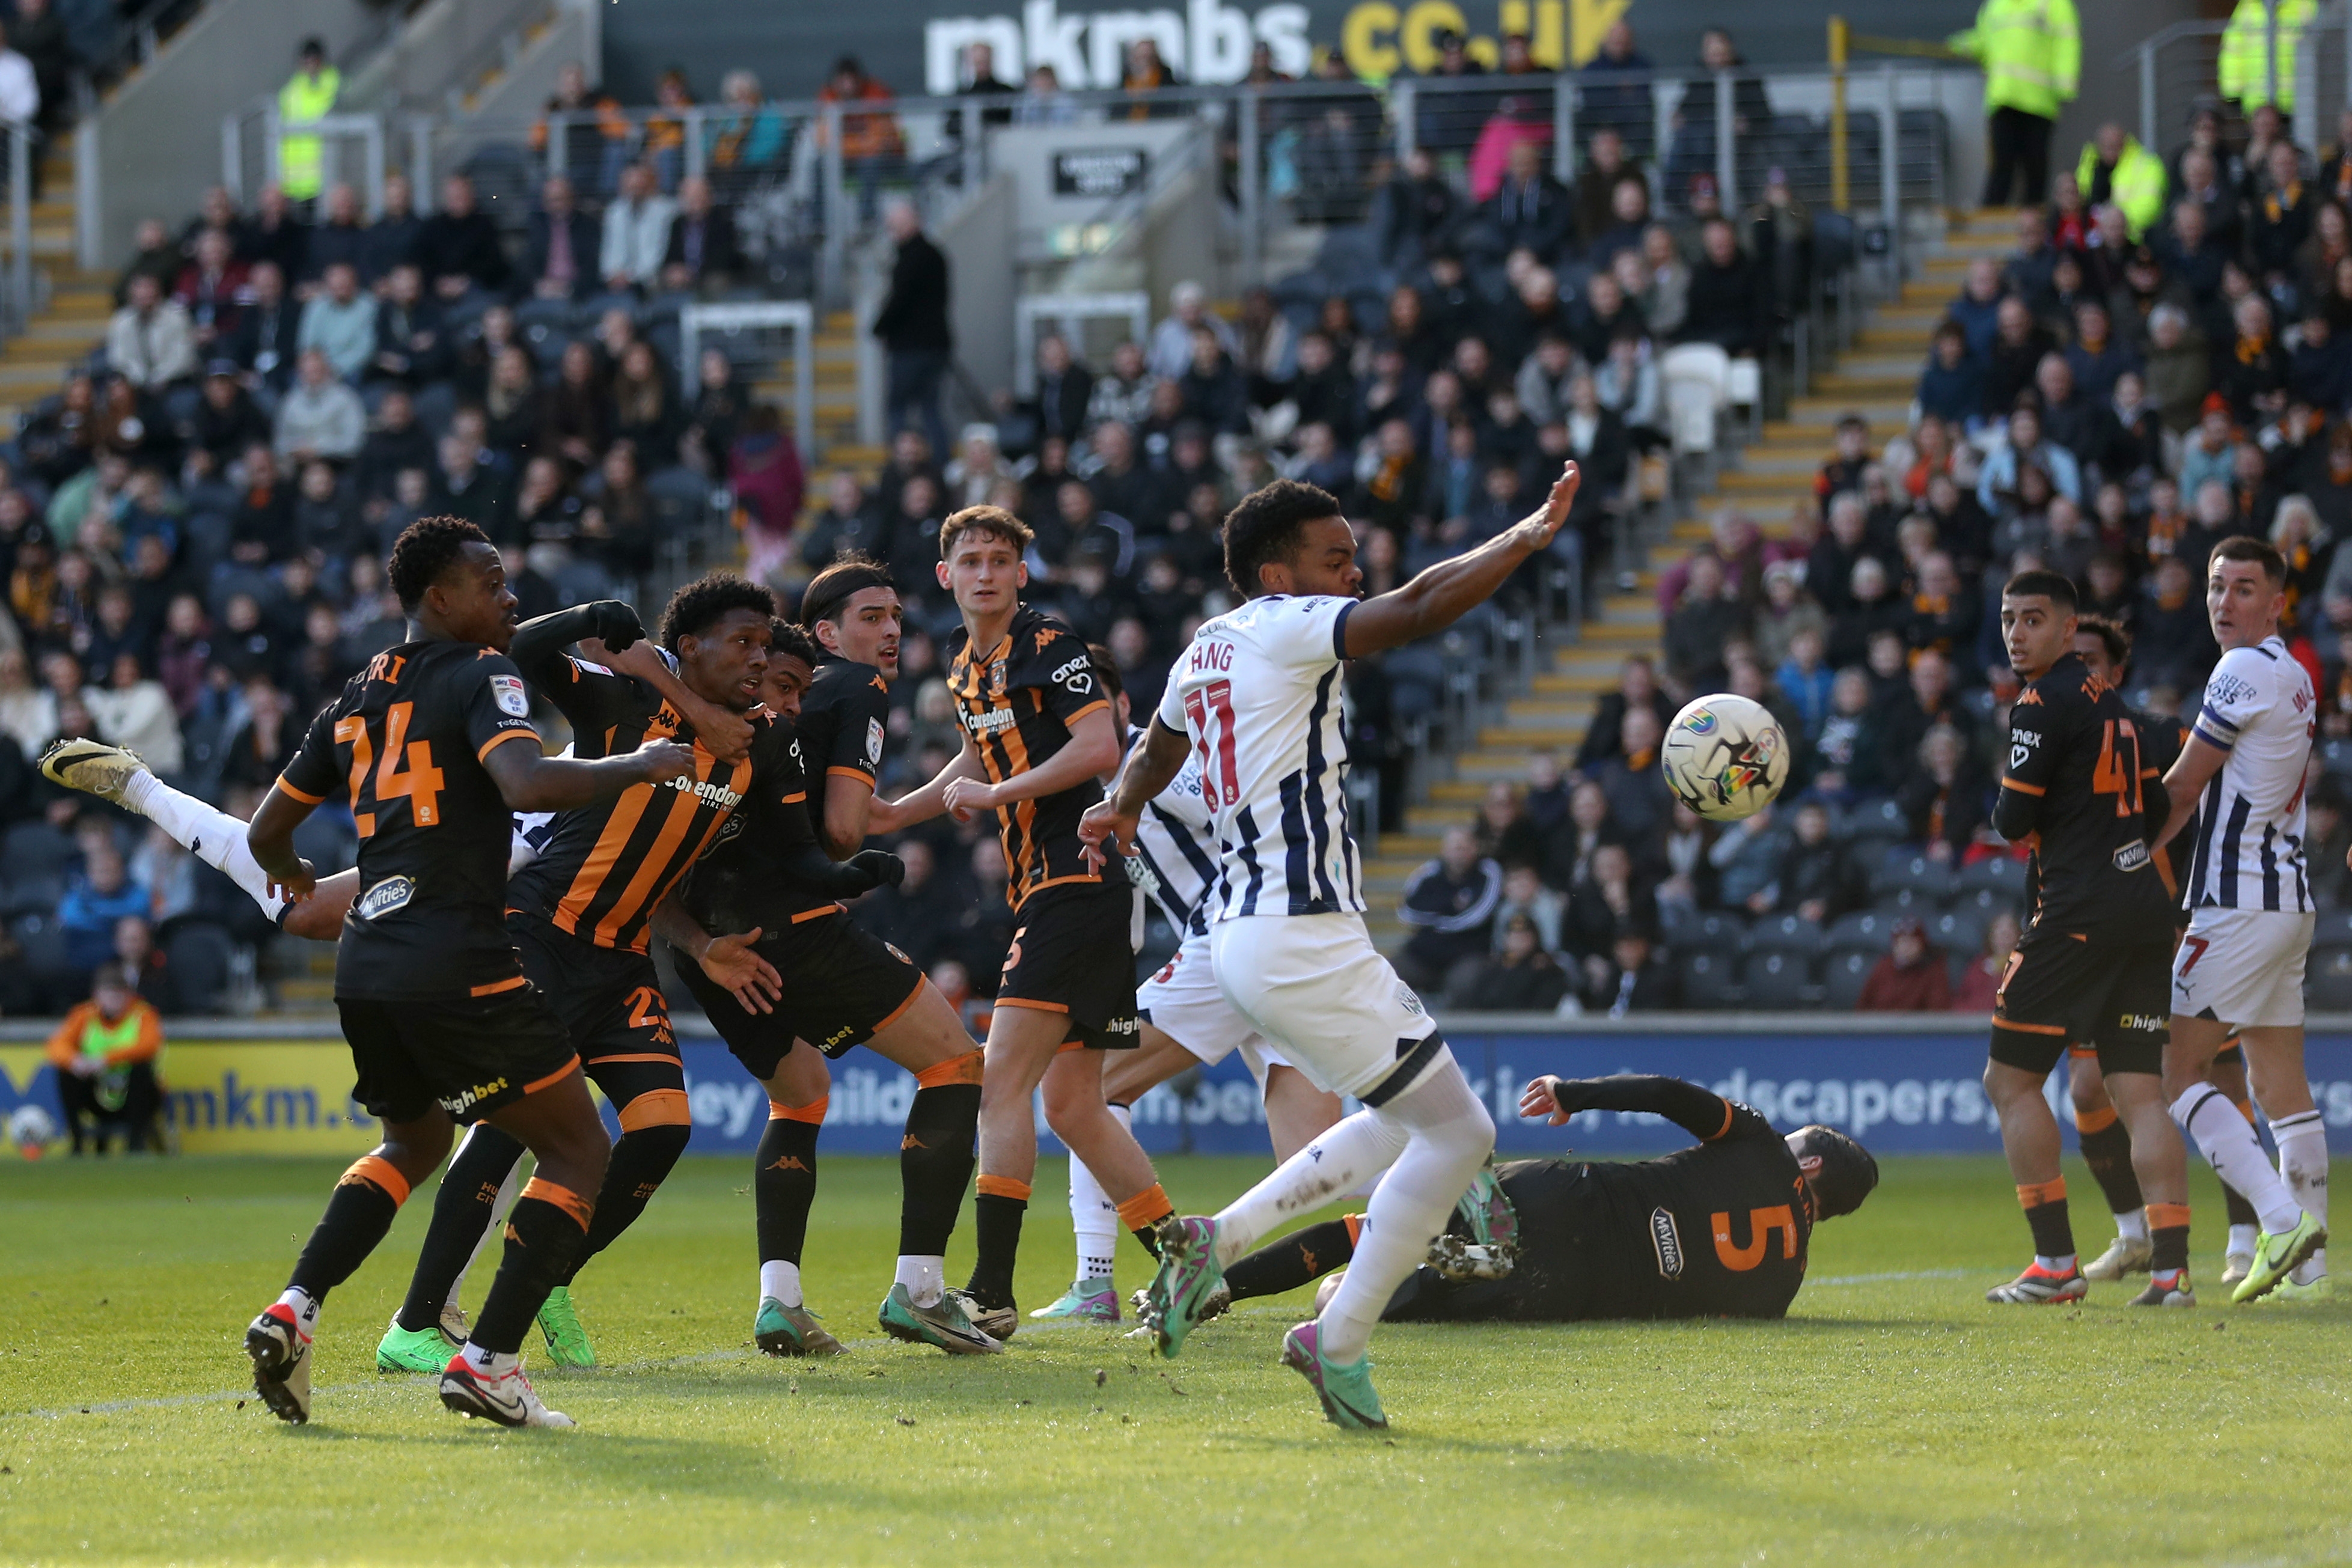 Grady Diangana attempts to make contact with the ball in the Hull penalty area